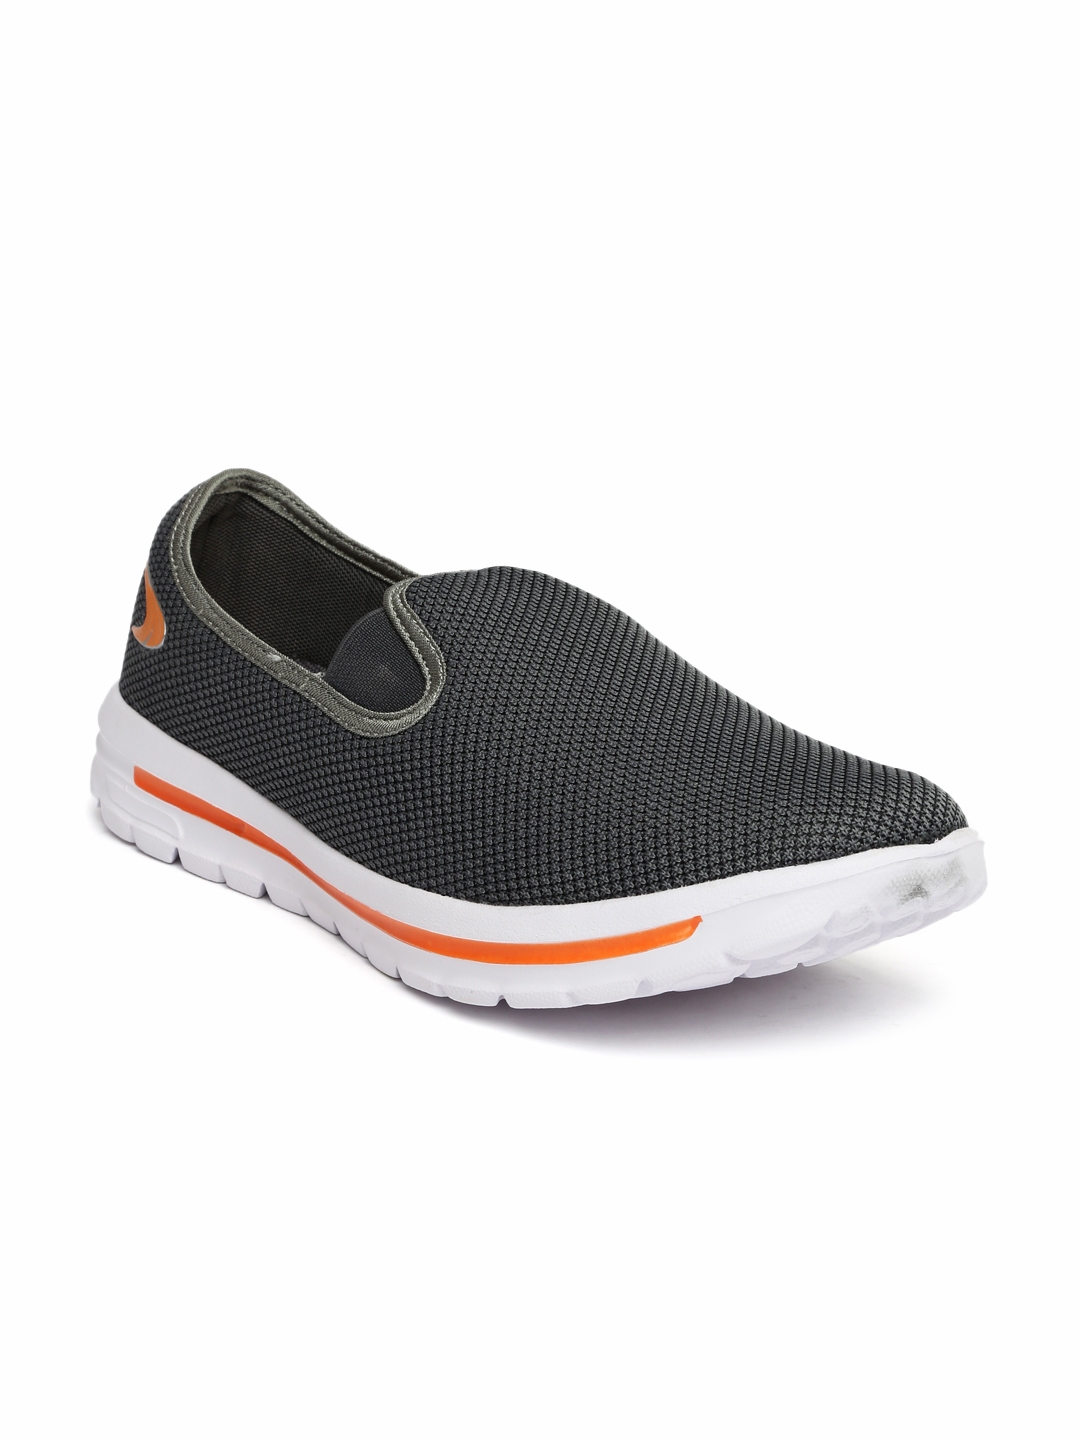 Buy Performax Men Grey Running Shoes - Sports Shoes for Men 2043824 ...